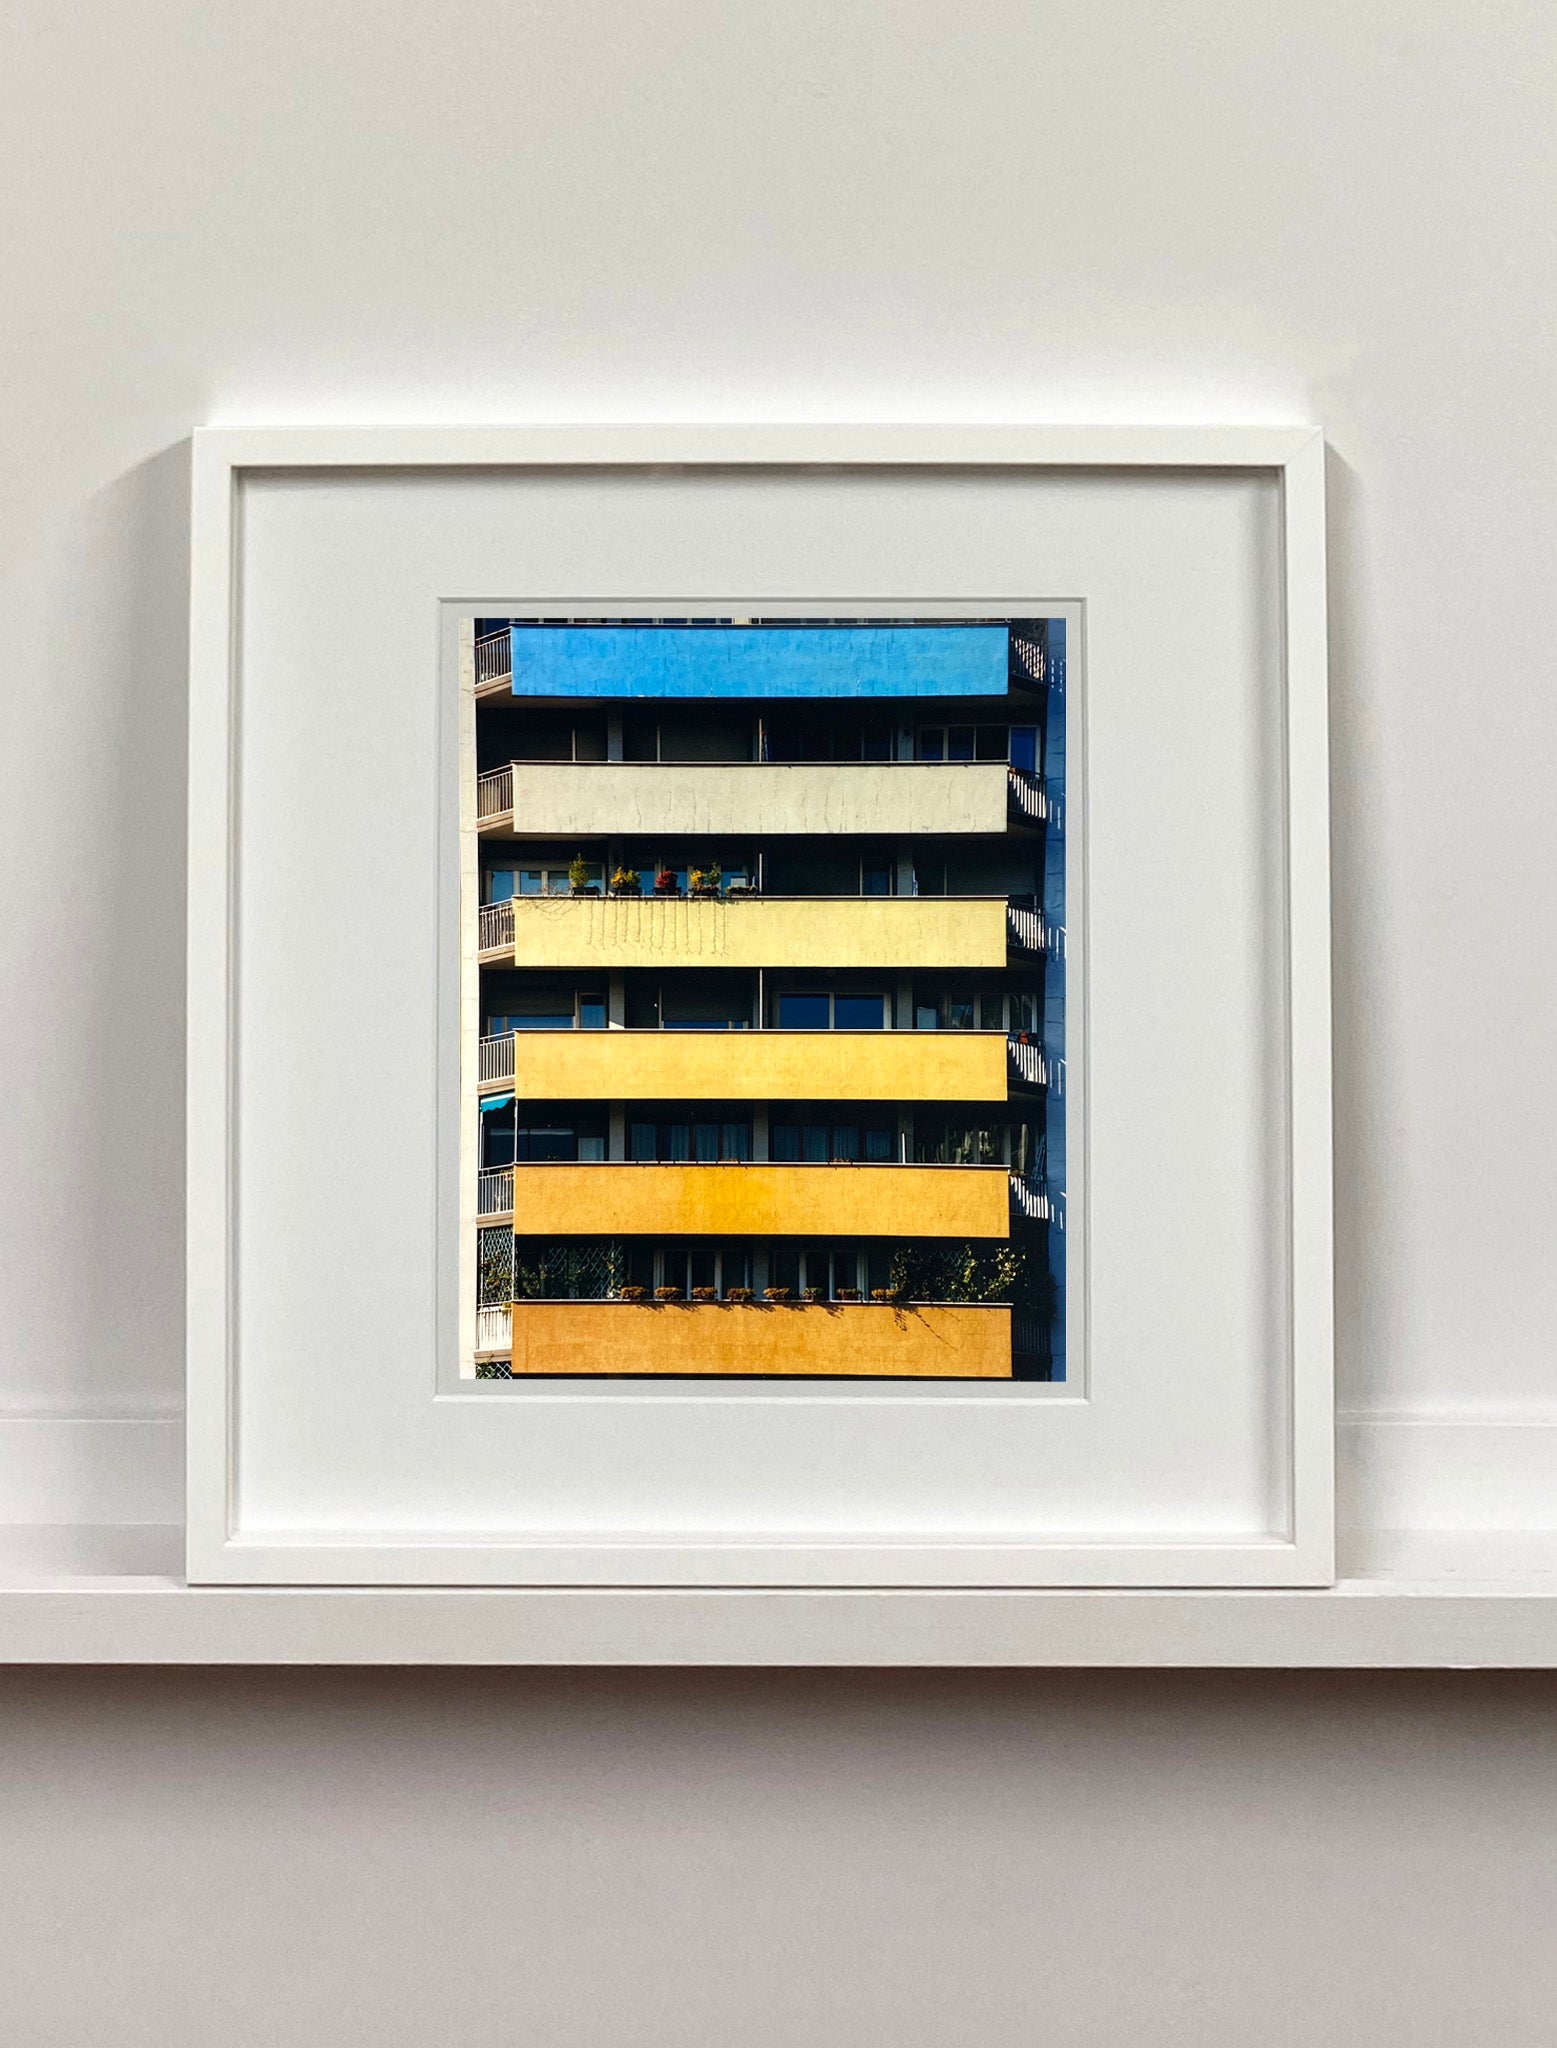 'Rainbow Apartments' captures Italian design and architecture, showing a multi-coloured nineteen-sixties block of flats. This artwork is part of Richard Heeps' series 'A Short History of Milan' which began in November 2018 for a special project featuring at the Affordable Art Fair Milan 2019, and the series is ongoing. There is a reoccurring linear, structural theme throughout the series, capturing the Milanese use of materials in design such as glass, metal, wood and stone.